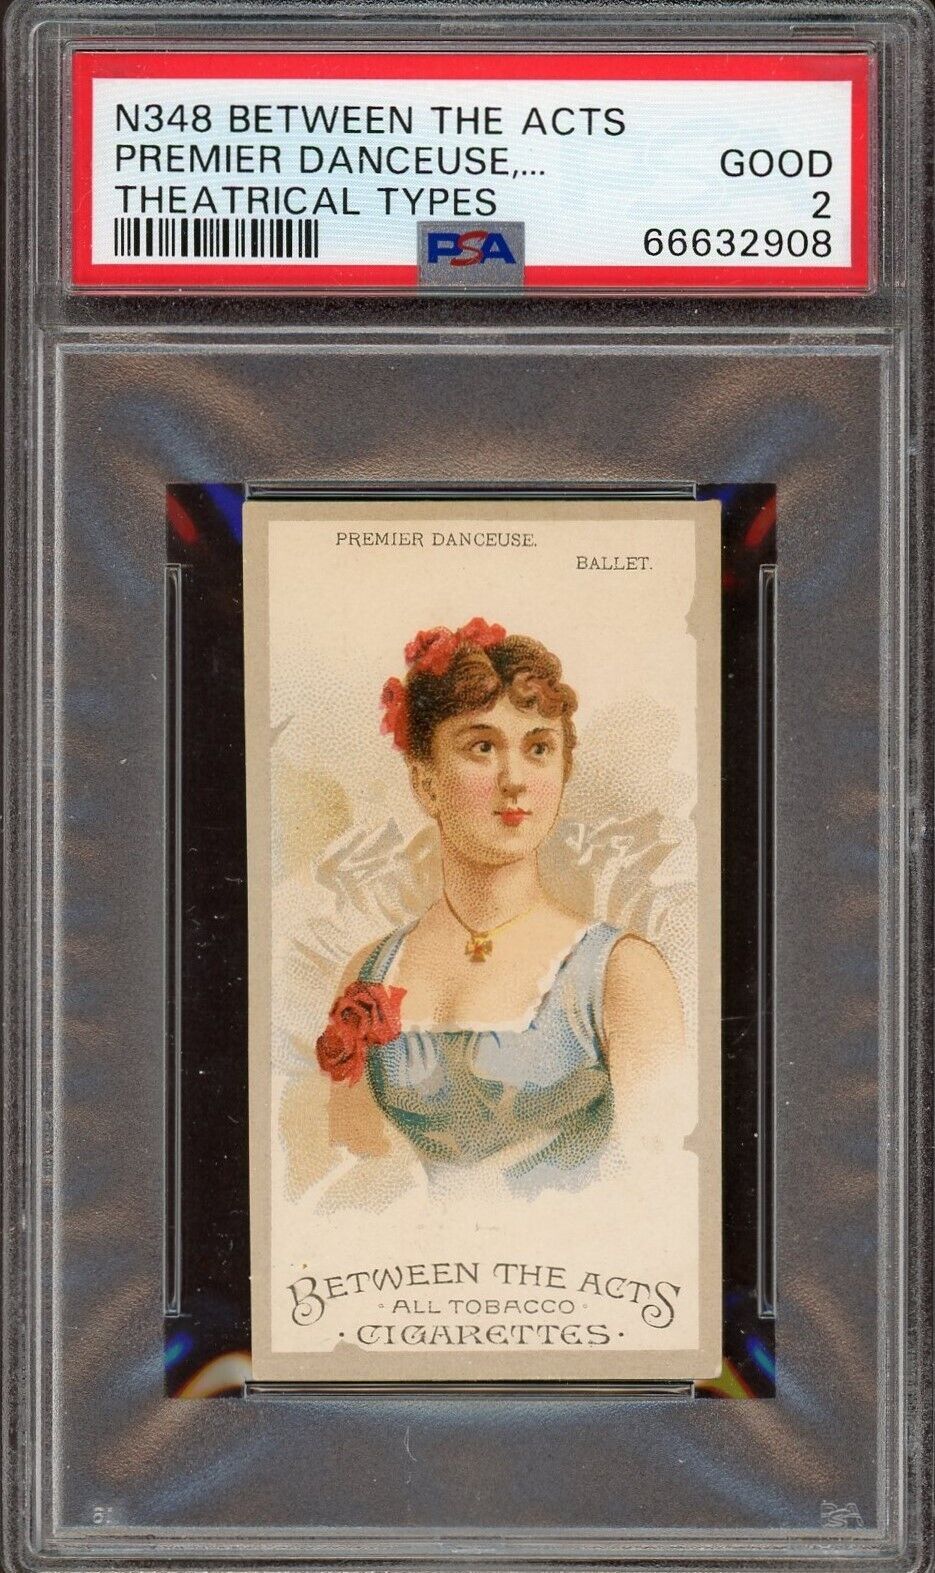 N348 Between The Acts Theatrical Types "Premier Danceuse, Ballet" PSA 2 Good